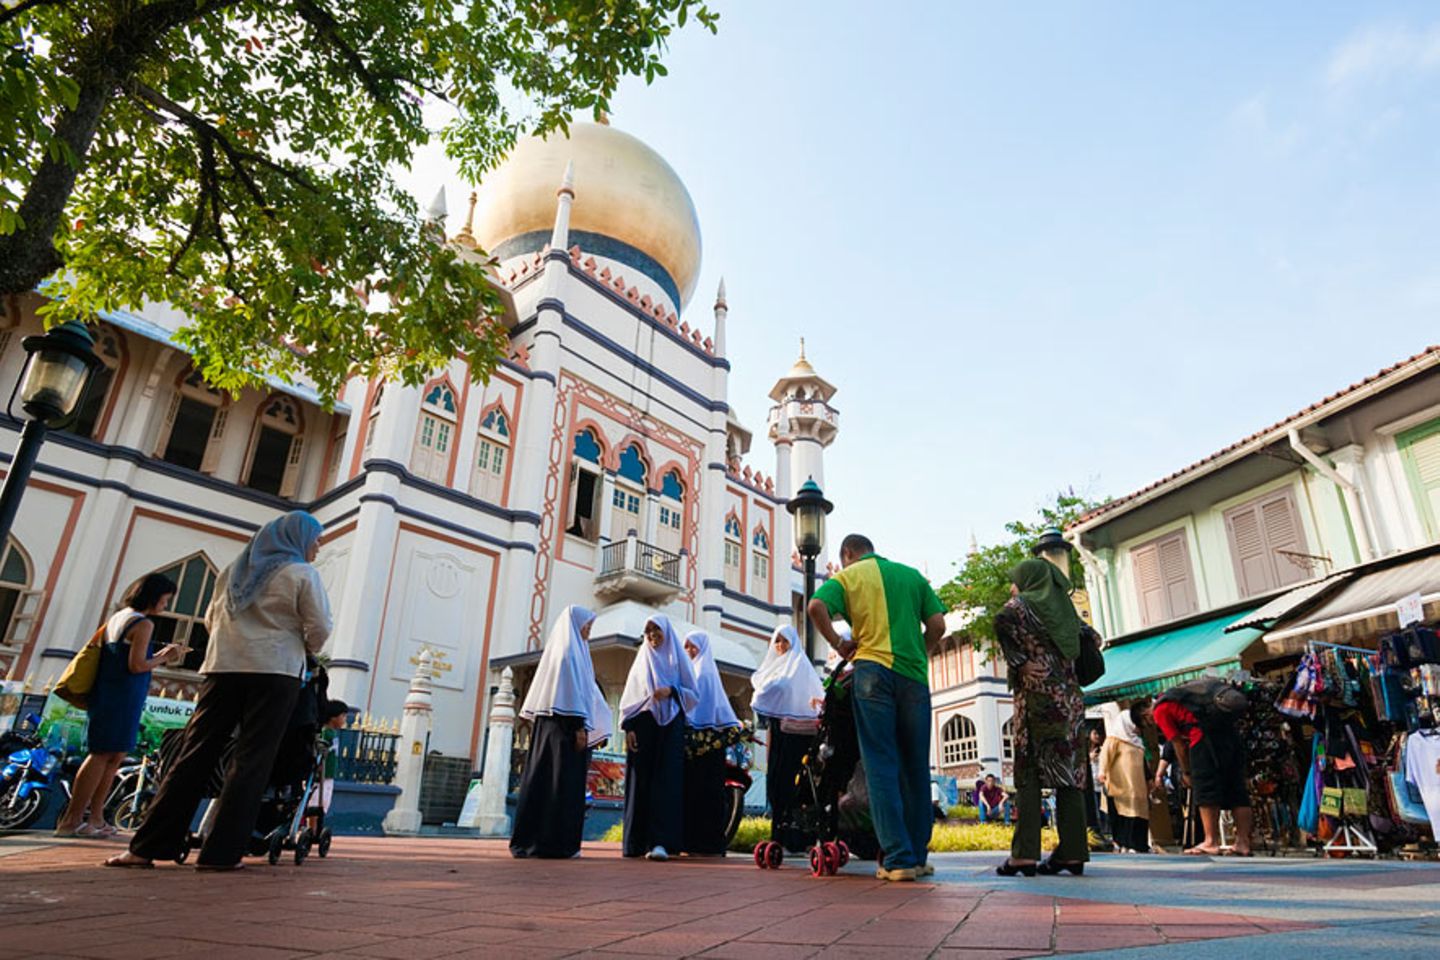 Arabisches Flair in Kampong Glam